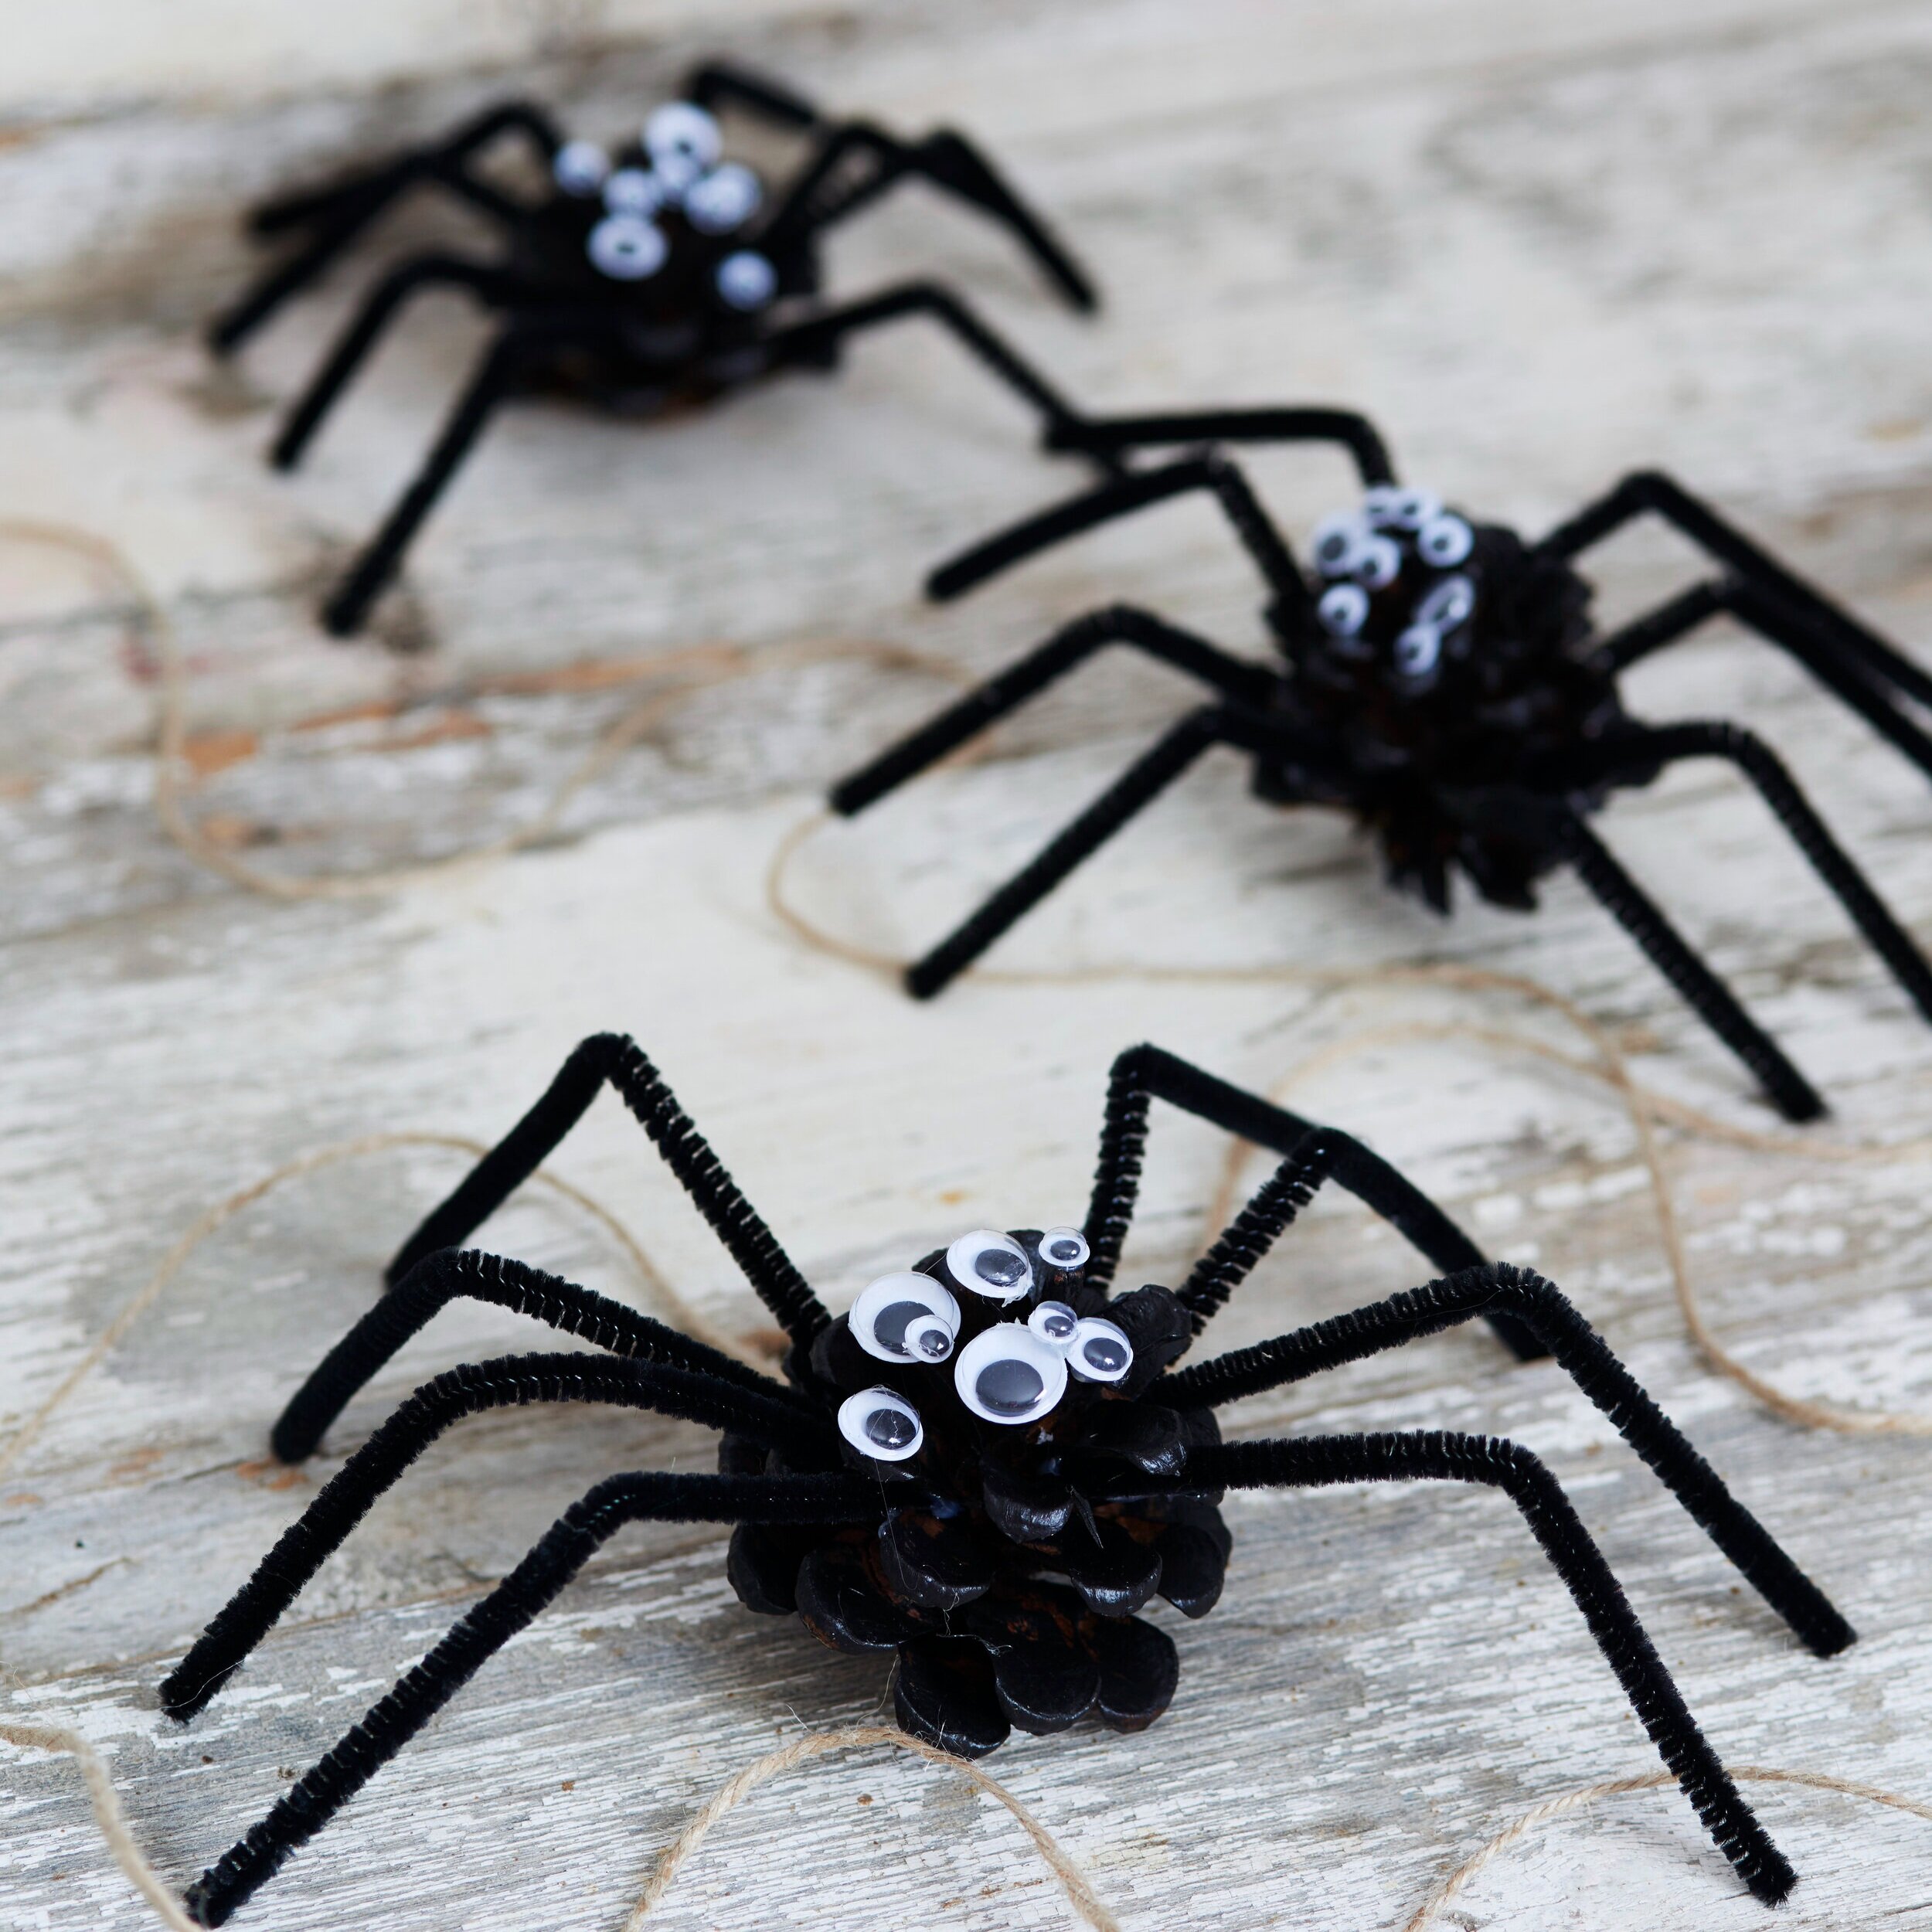 How to Make Pine Cone Spiders